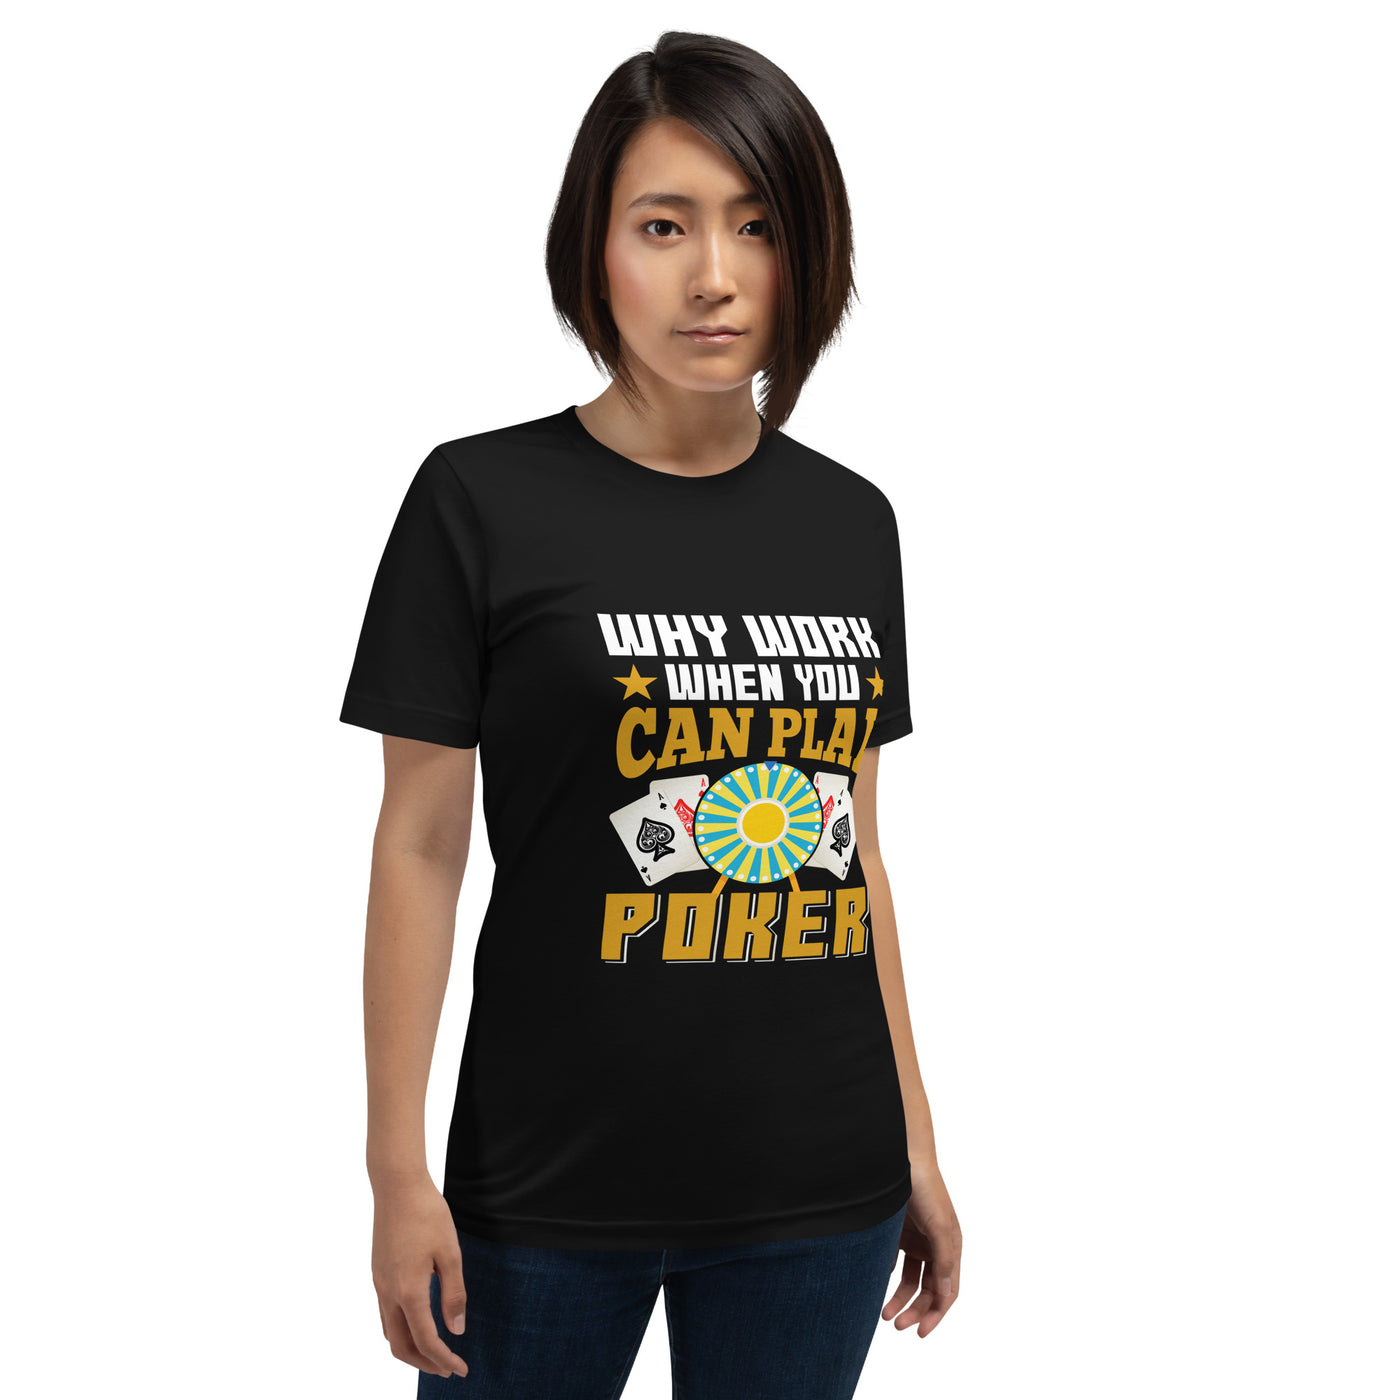 Why Work when you can Play Poker - Unisex t-shirt